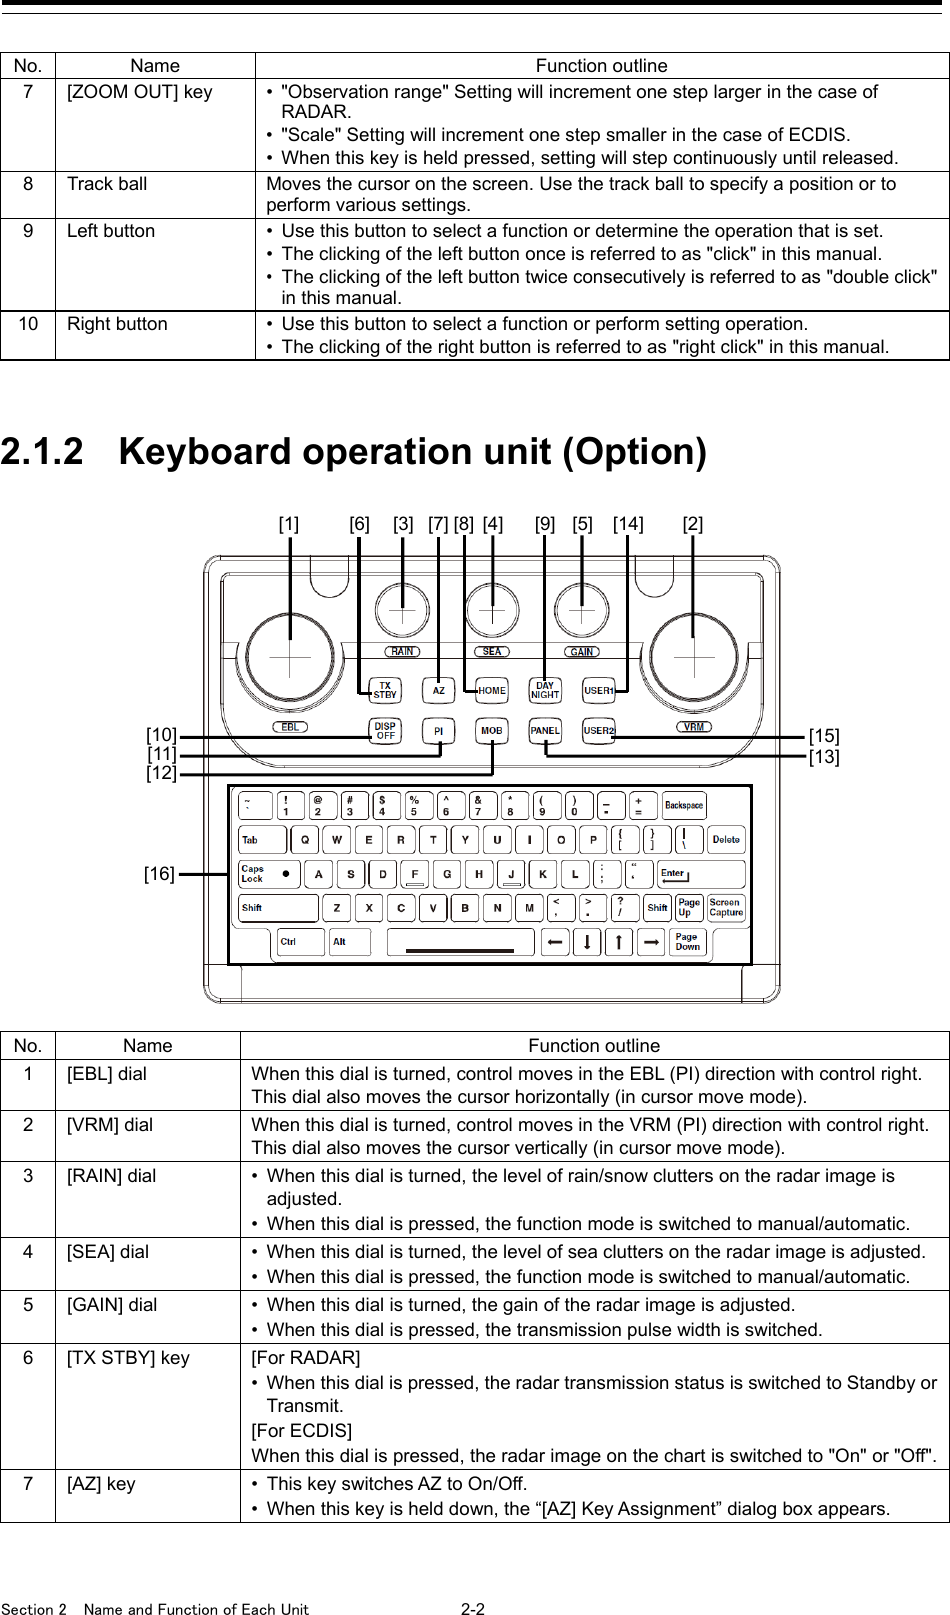  Section 2  Name and Function of Each Unit  2-2  No. Name Function outline 7 [ZOOM OUT] key • &quot;Observation range&quot; Setting will increment one step larger in the case of RADAR. •  &quot;Scale&quot; Setting will increment one step smaller in the case of ECDIS. • When this key is held pressed, setting will step continuously until released. 8 Track ball Moves the cursor on the screen. Use the track ball to specify a position or to perform various settings. 9 Left button • Use this button to select a function or determine the operation that is set. • The clicking of the left button once is referred to as &quot;click&quot; in this manual. • The clicking of the left button twice consecutively is referred to as &quot;double click&quot; in this manual. 10 Right button • Use this button to select a function or perform setting operation. • The clicking of the right button is referred to as &quot;right click&quot; in this manual.   2.1.2 Keyboard operation unit (Option)   No. Name Function outline 1 [EBL] dial When this dial is turned, control moves in the EBL (PI) direction with control right. This dial also moves the cursor horizontally (in cursor move mode). 2  [VRM] dial When this dial is turned, control moves in the VRM (PI) direction with control right. This dial also moves the cursor vertically (in cursor move mode). 3 [RAIN] dial • When this dial is turned, the level of rain/snow clutters on the radar image is adjusted. • When this dial is pressed, the function mode is switched to manual/automatic. 4  [SEA] dial • When this dial is turned, the level of sea clutters on the radar image is adjusted. • When this dial is pressed, the function mode is switched to manual/automatic. 5 [GAIN] dial • When this dial is turned, the gain of the radar image is adjusted. • When this dial is pressed, the transmission pulse width is switched. 6  [TX STBY] key  [For RADAR] • When this dial is pressed, the radar transmission status is switched to Standby or Transmit. [For ECDIS] When this dial is pressed, the radar image on the chart is switched to &quot;On&quot; or &quot;Off&quot;. 7 [AZ] key • This key switches AZ to On/Off. • When this key is held down, the “[AZ] Key Assignment” dialog box appears.    [1] [3] [15] [10] [2] [4] [5] [6] [9] [8] [14] [13] [12] [7] [11] [16]  